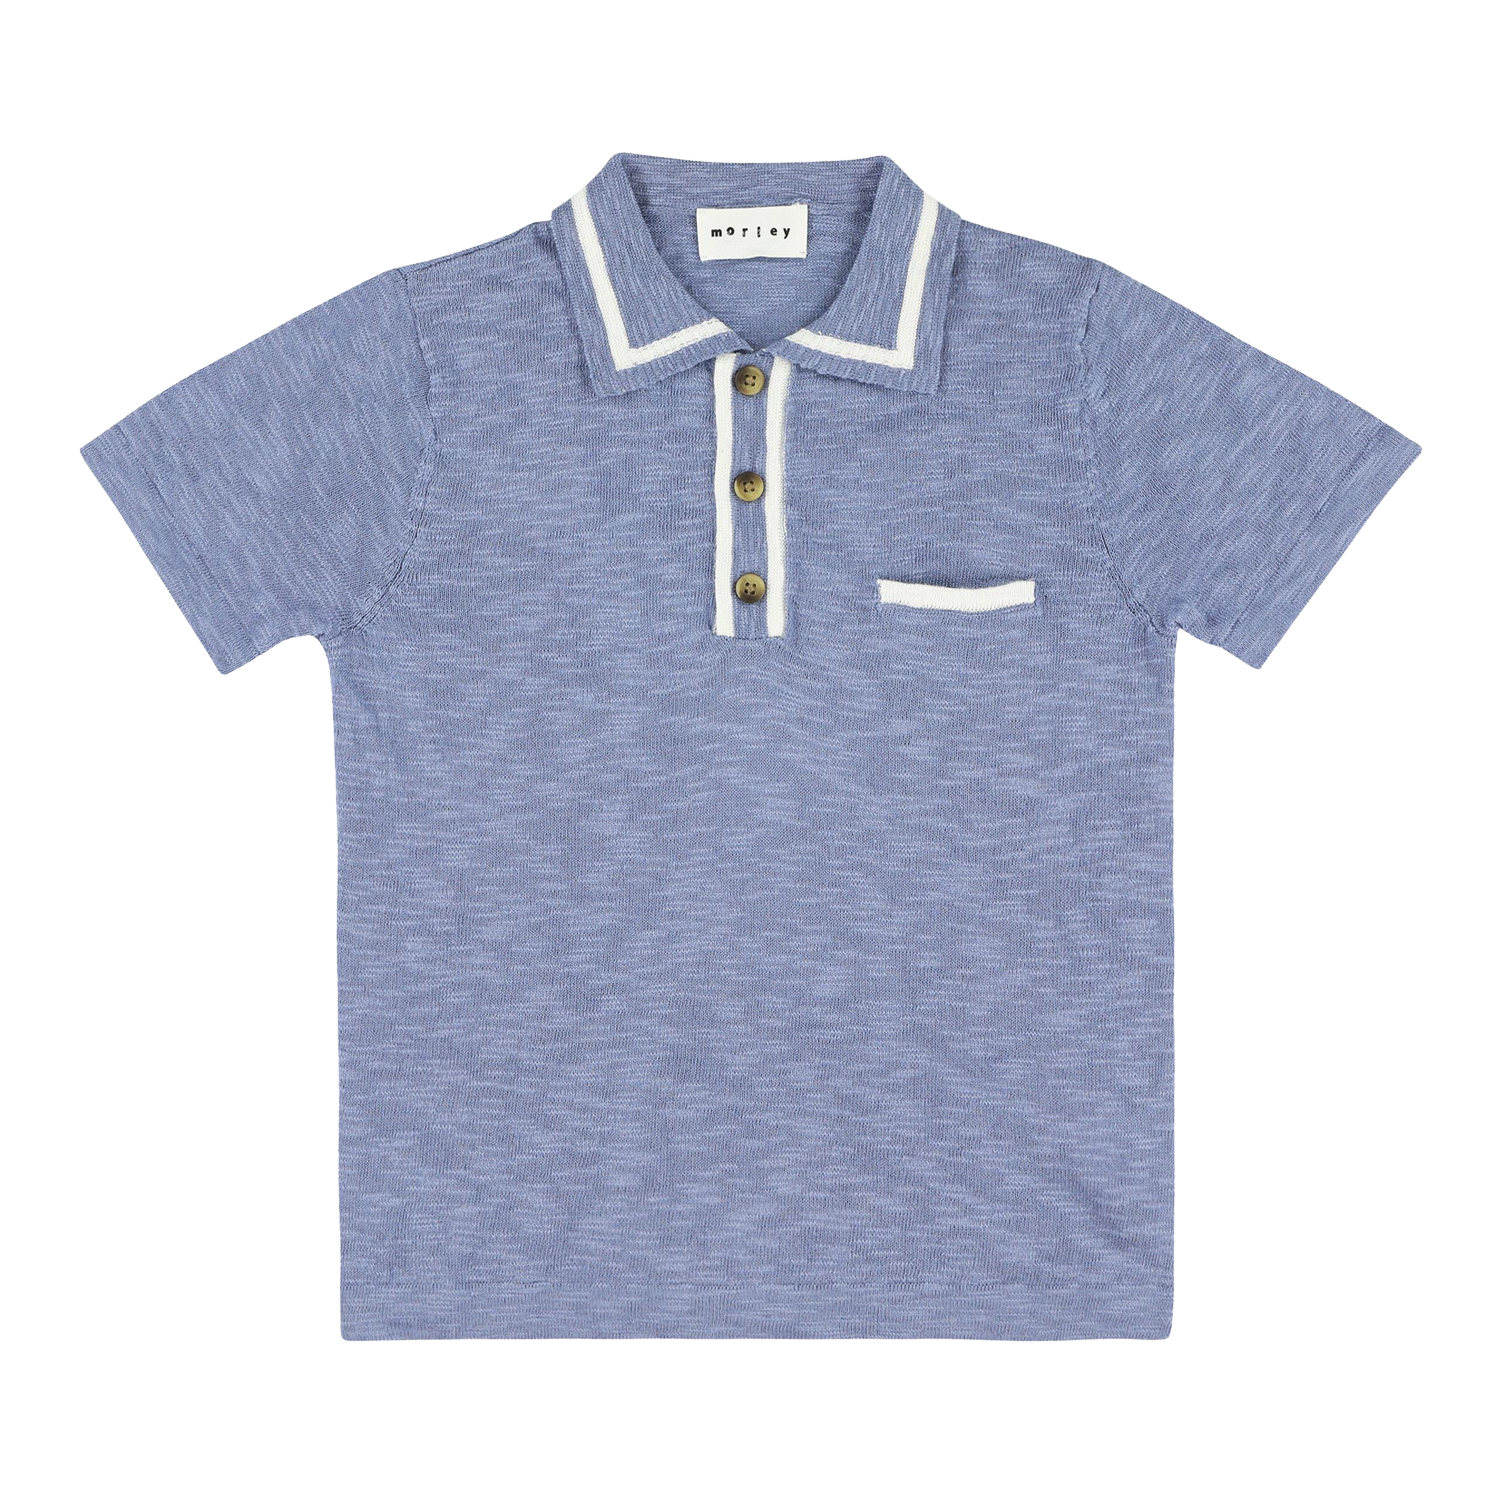 Morley Pako Knitted Polo - Steel